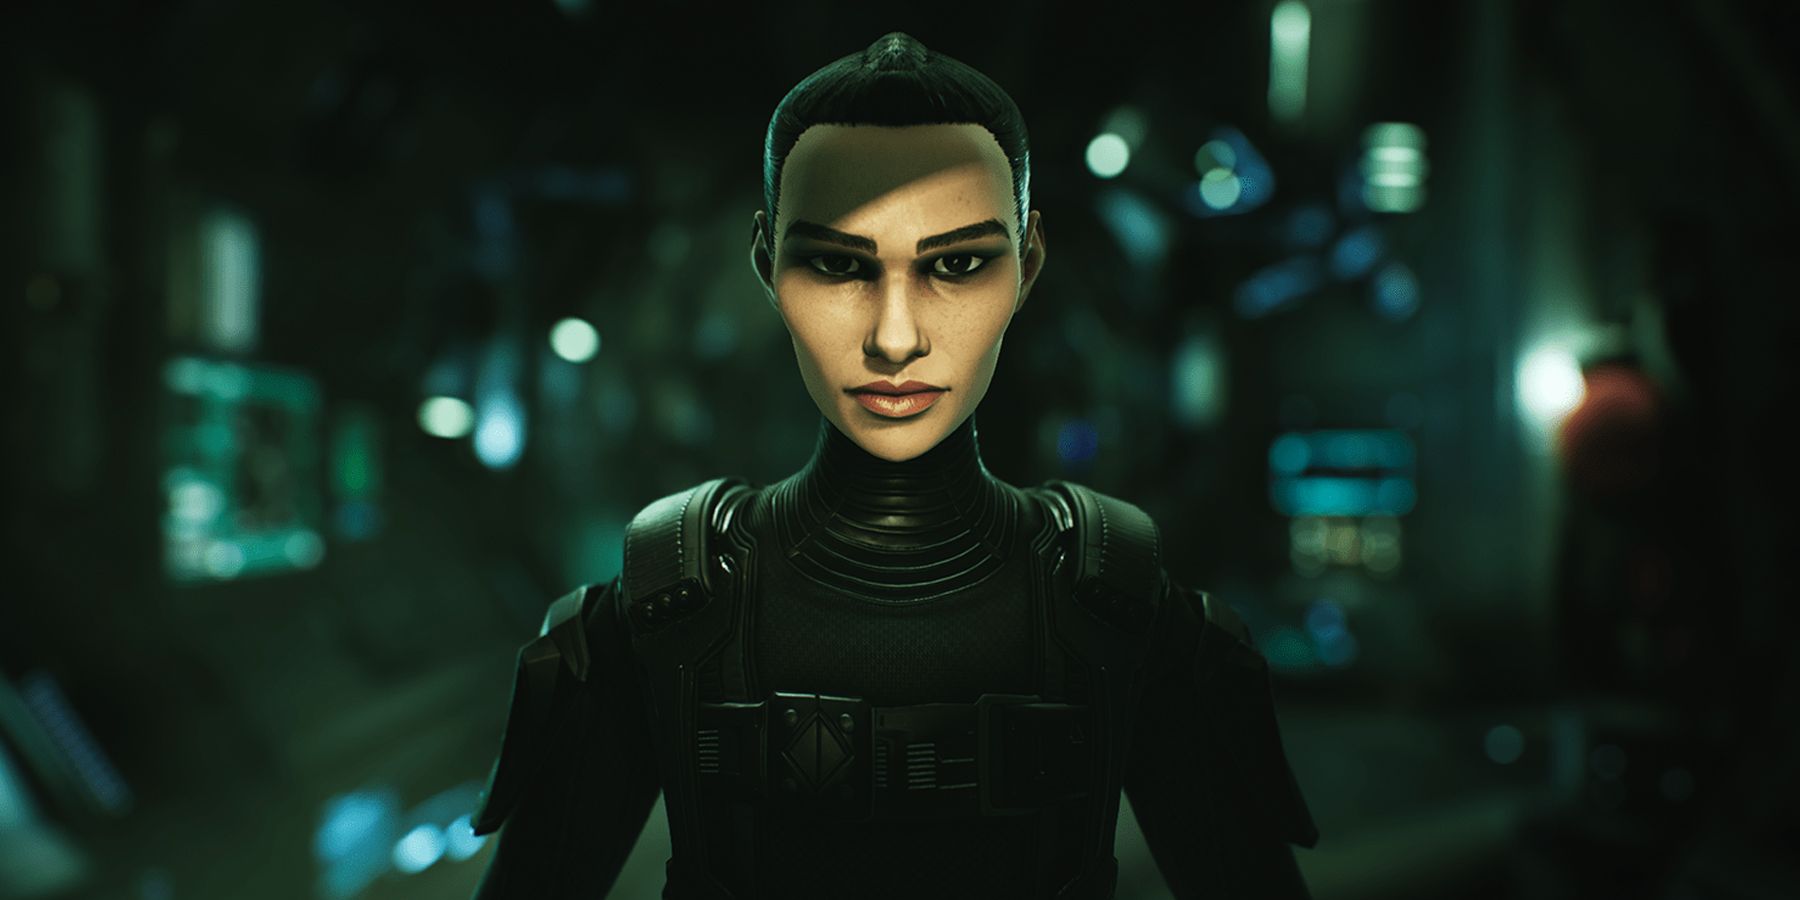 Camina Drummer as she's depicted in the trailer for Telltale Games' upcoming game The Expanse: A Telltale Series.